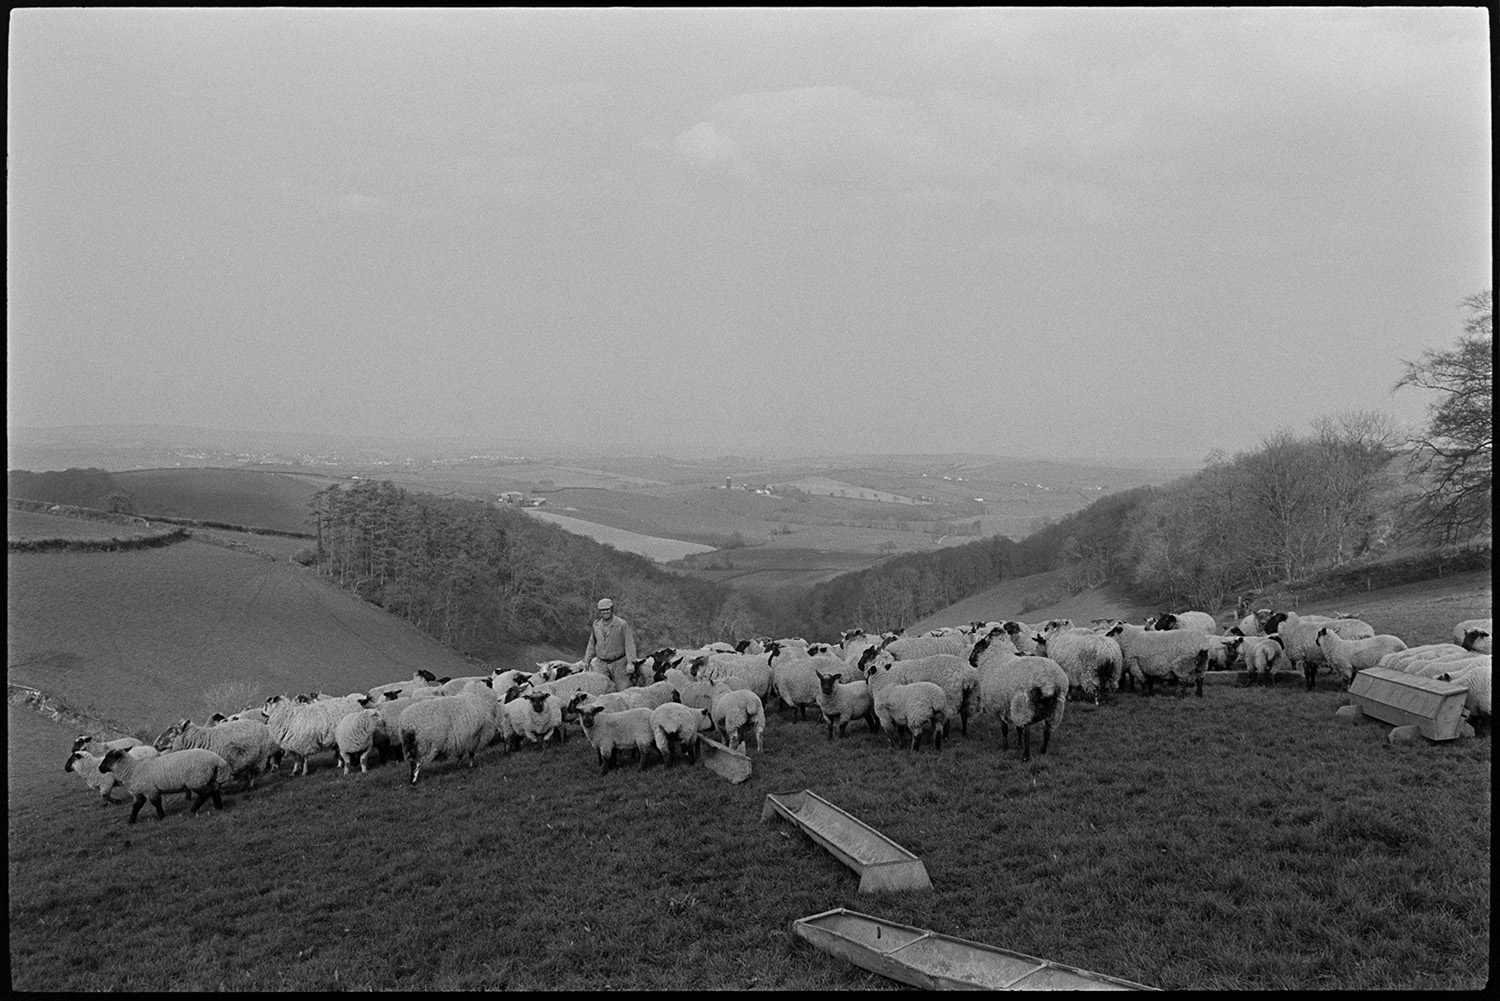 Shepherd feeding sheep.
[A man feeding his sheep in a field at Warkleigh, Satterleigh. There are metal feeding troughs on the ground and a wooded valley and fields are visible in the background.]